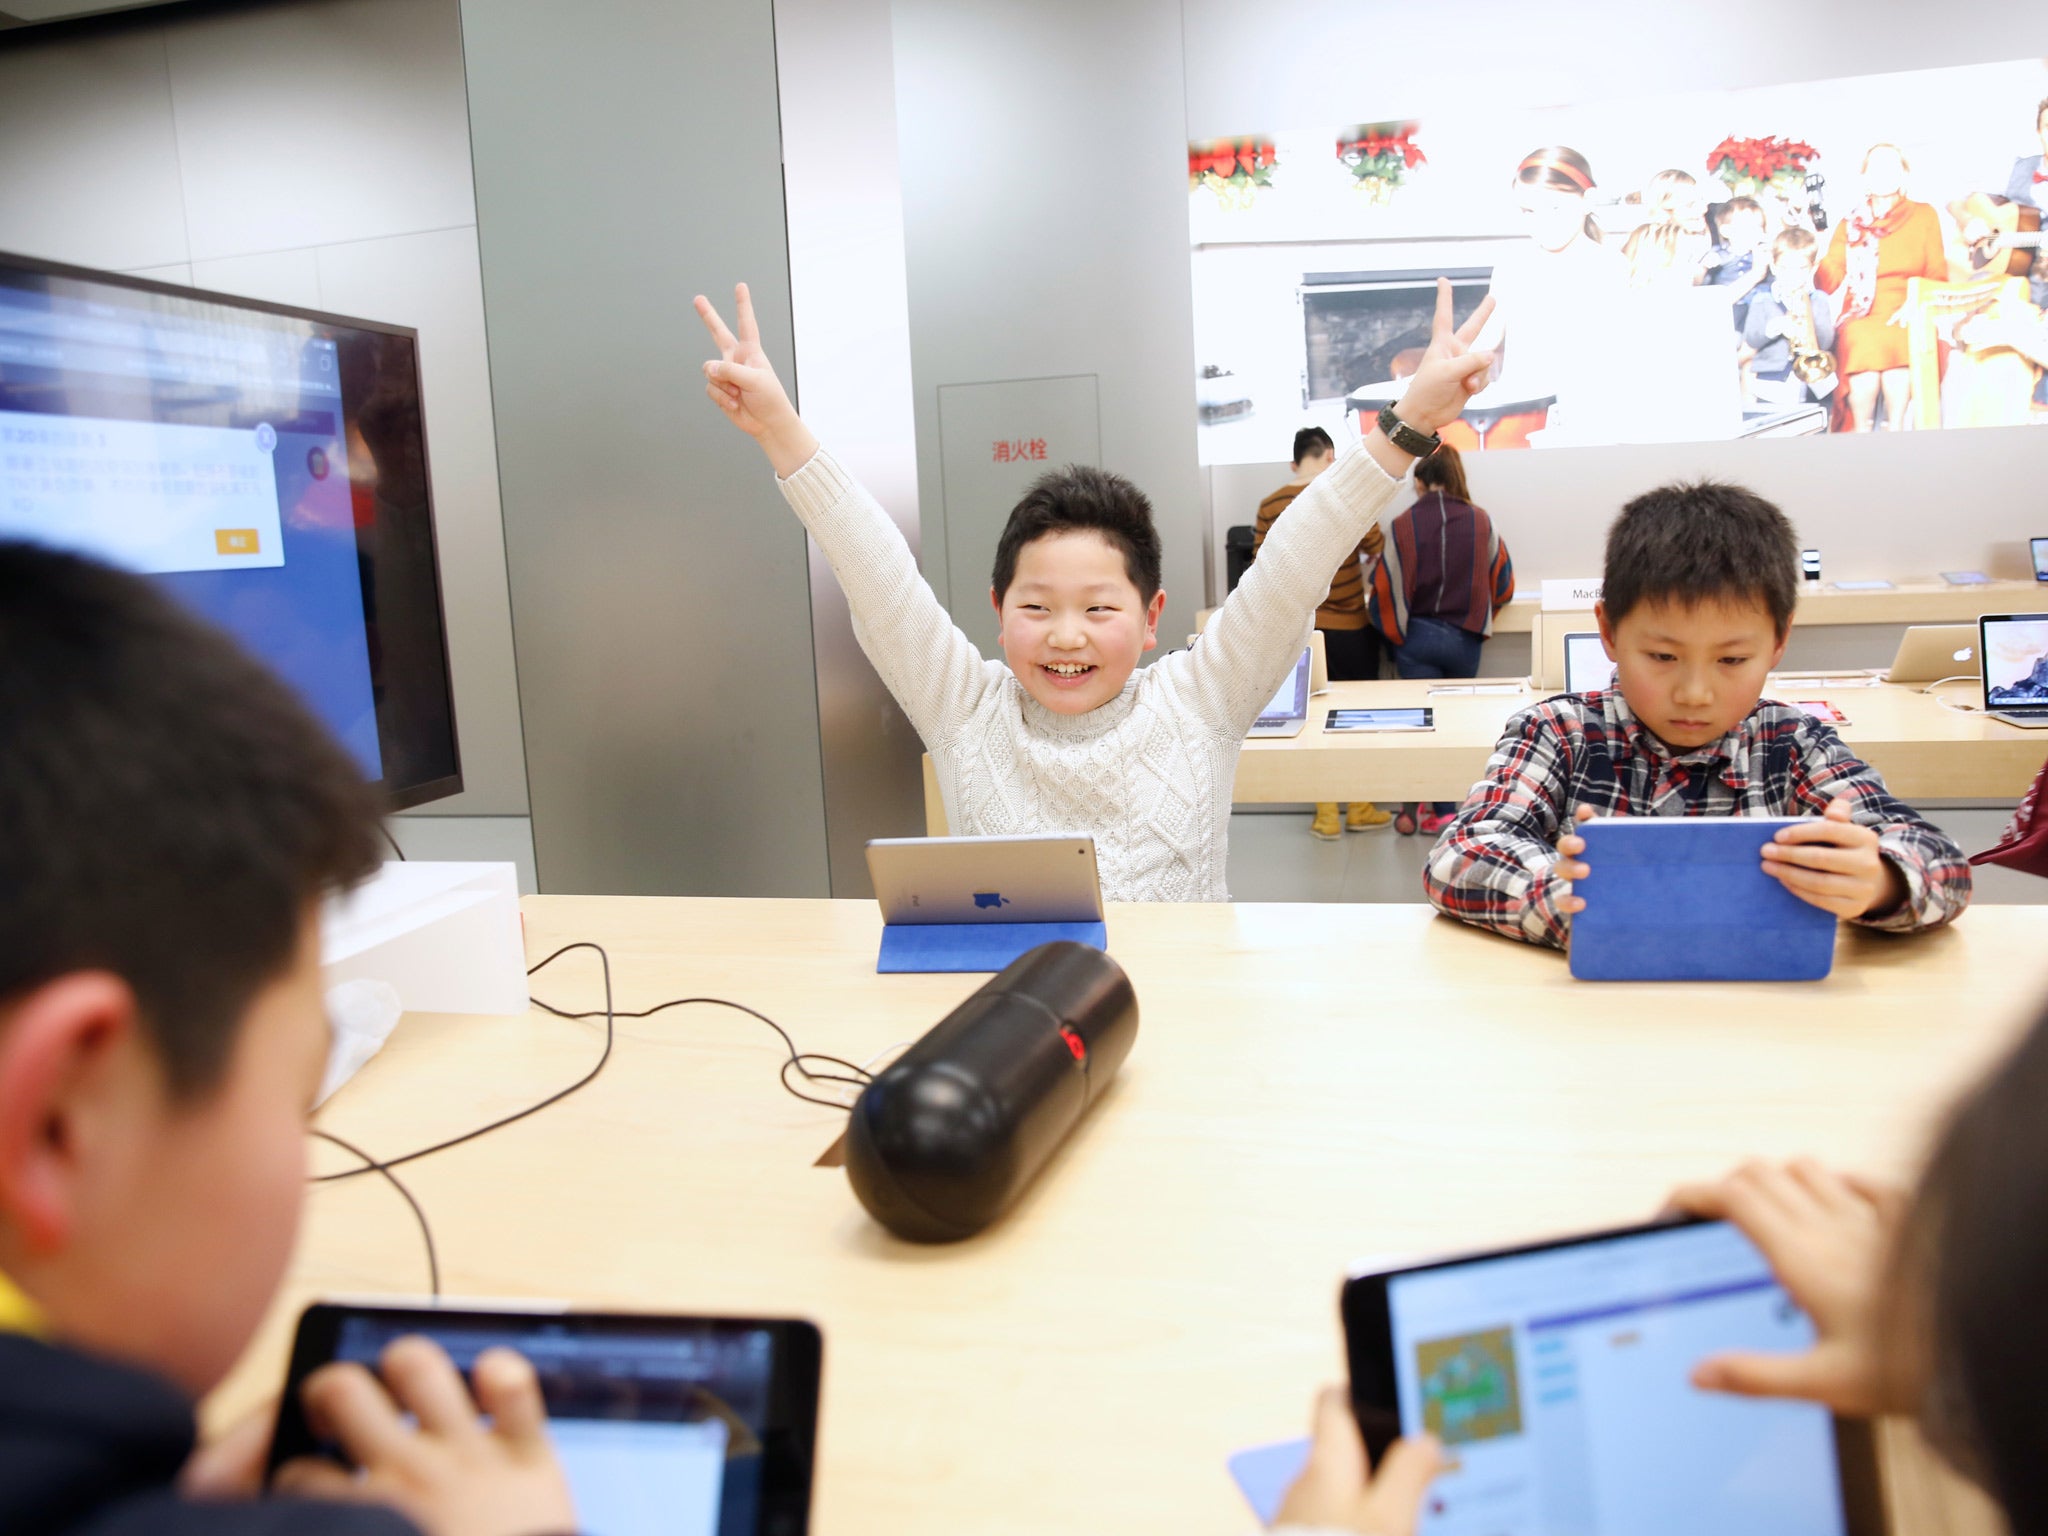 Children take part in Apple's Hour of Code training at the Apple Store iapm, in Shanghai